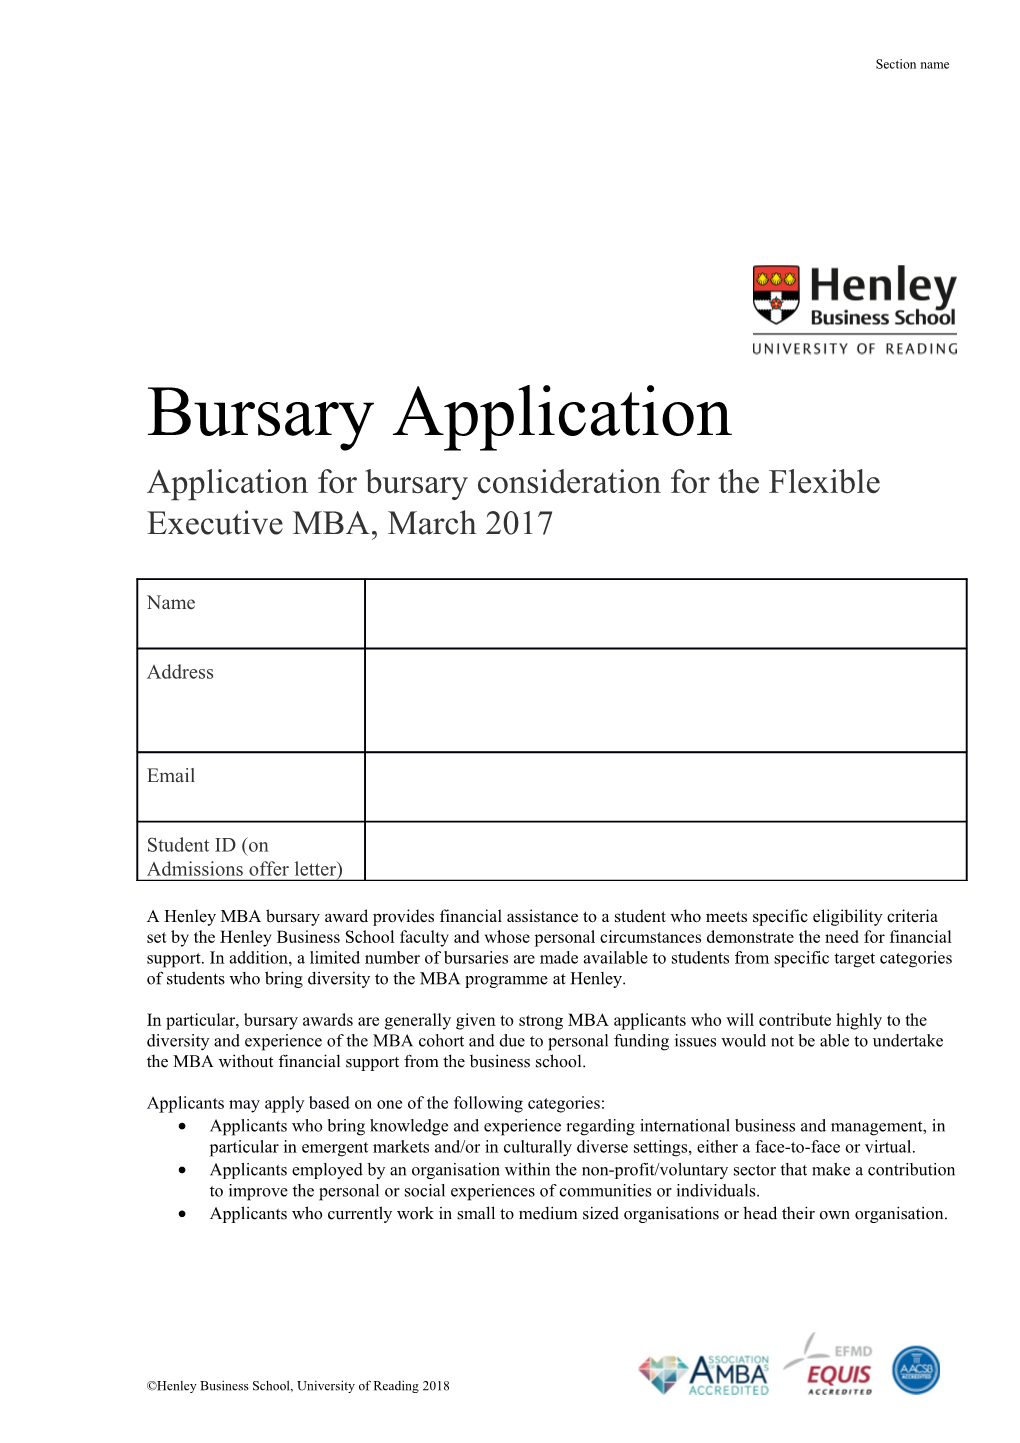 HBS Document Template